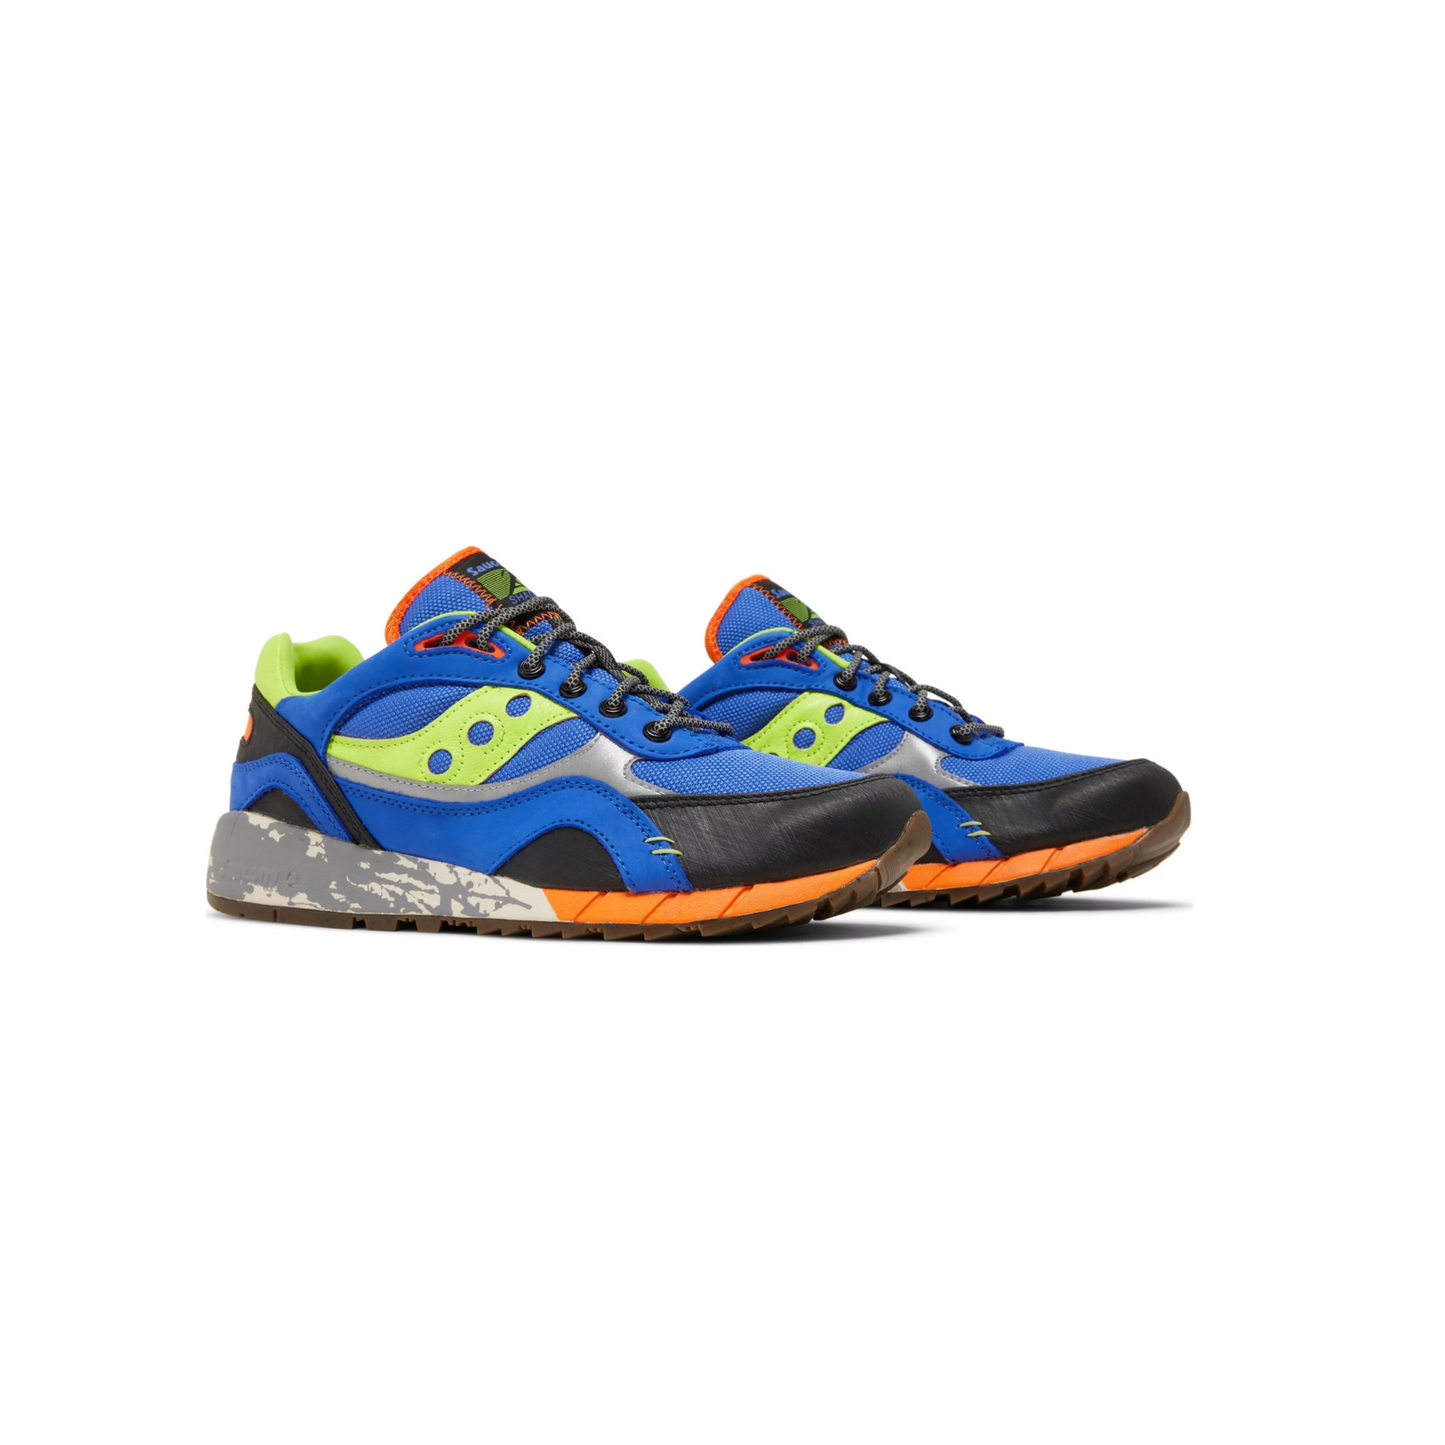 SAUCONY SHADOW 600 TRAIL 'BLUE LIME'